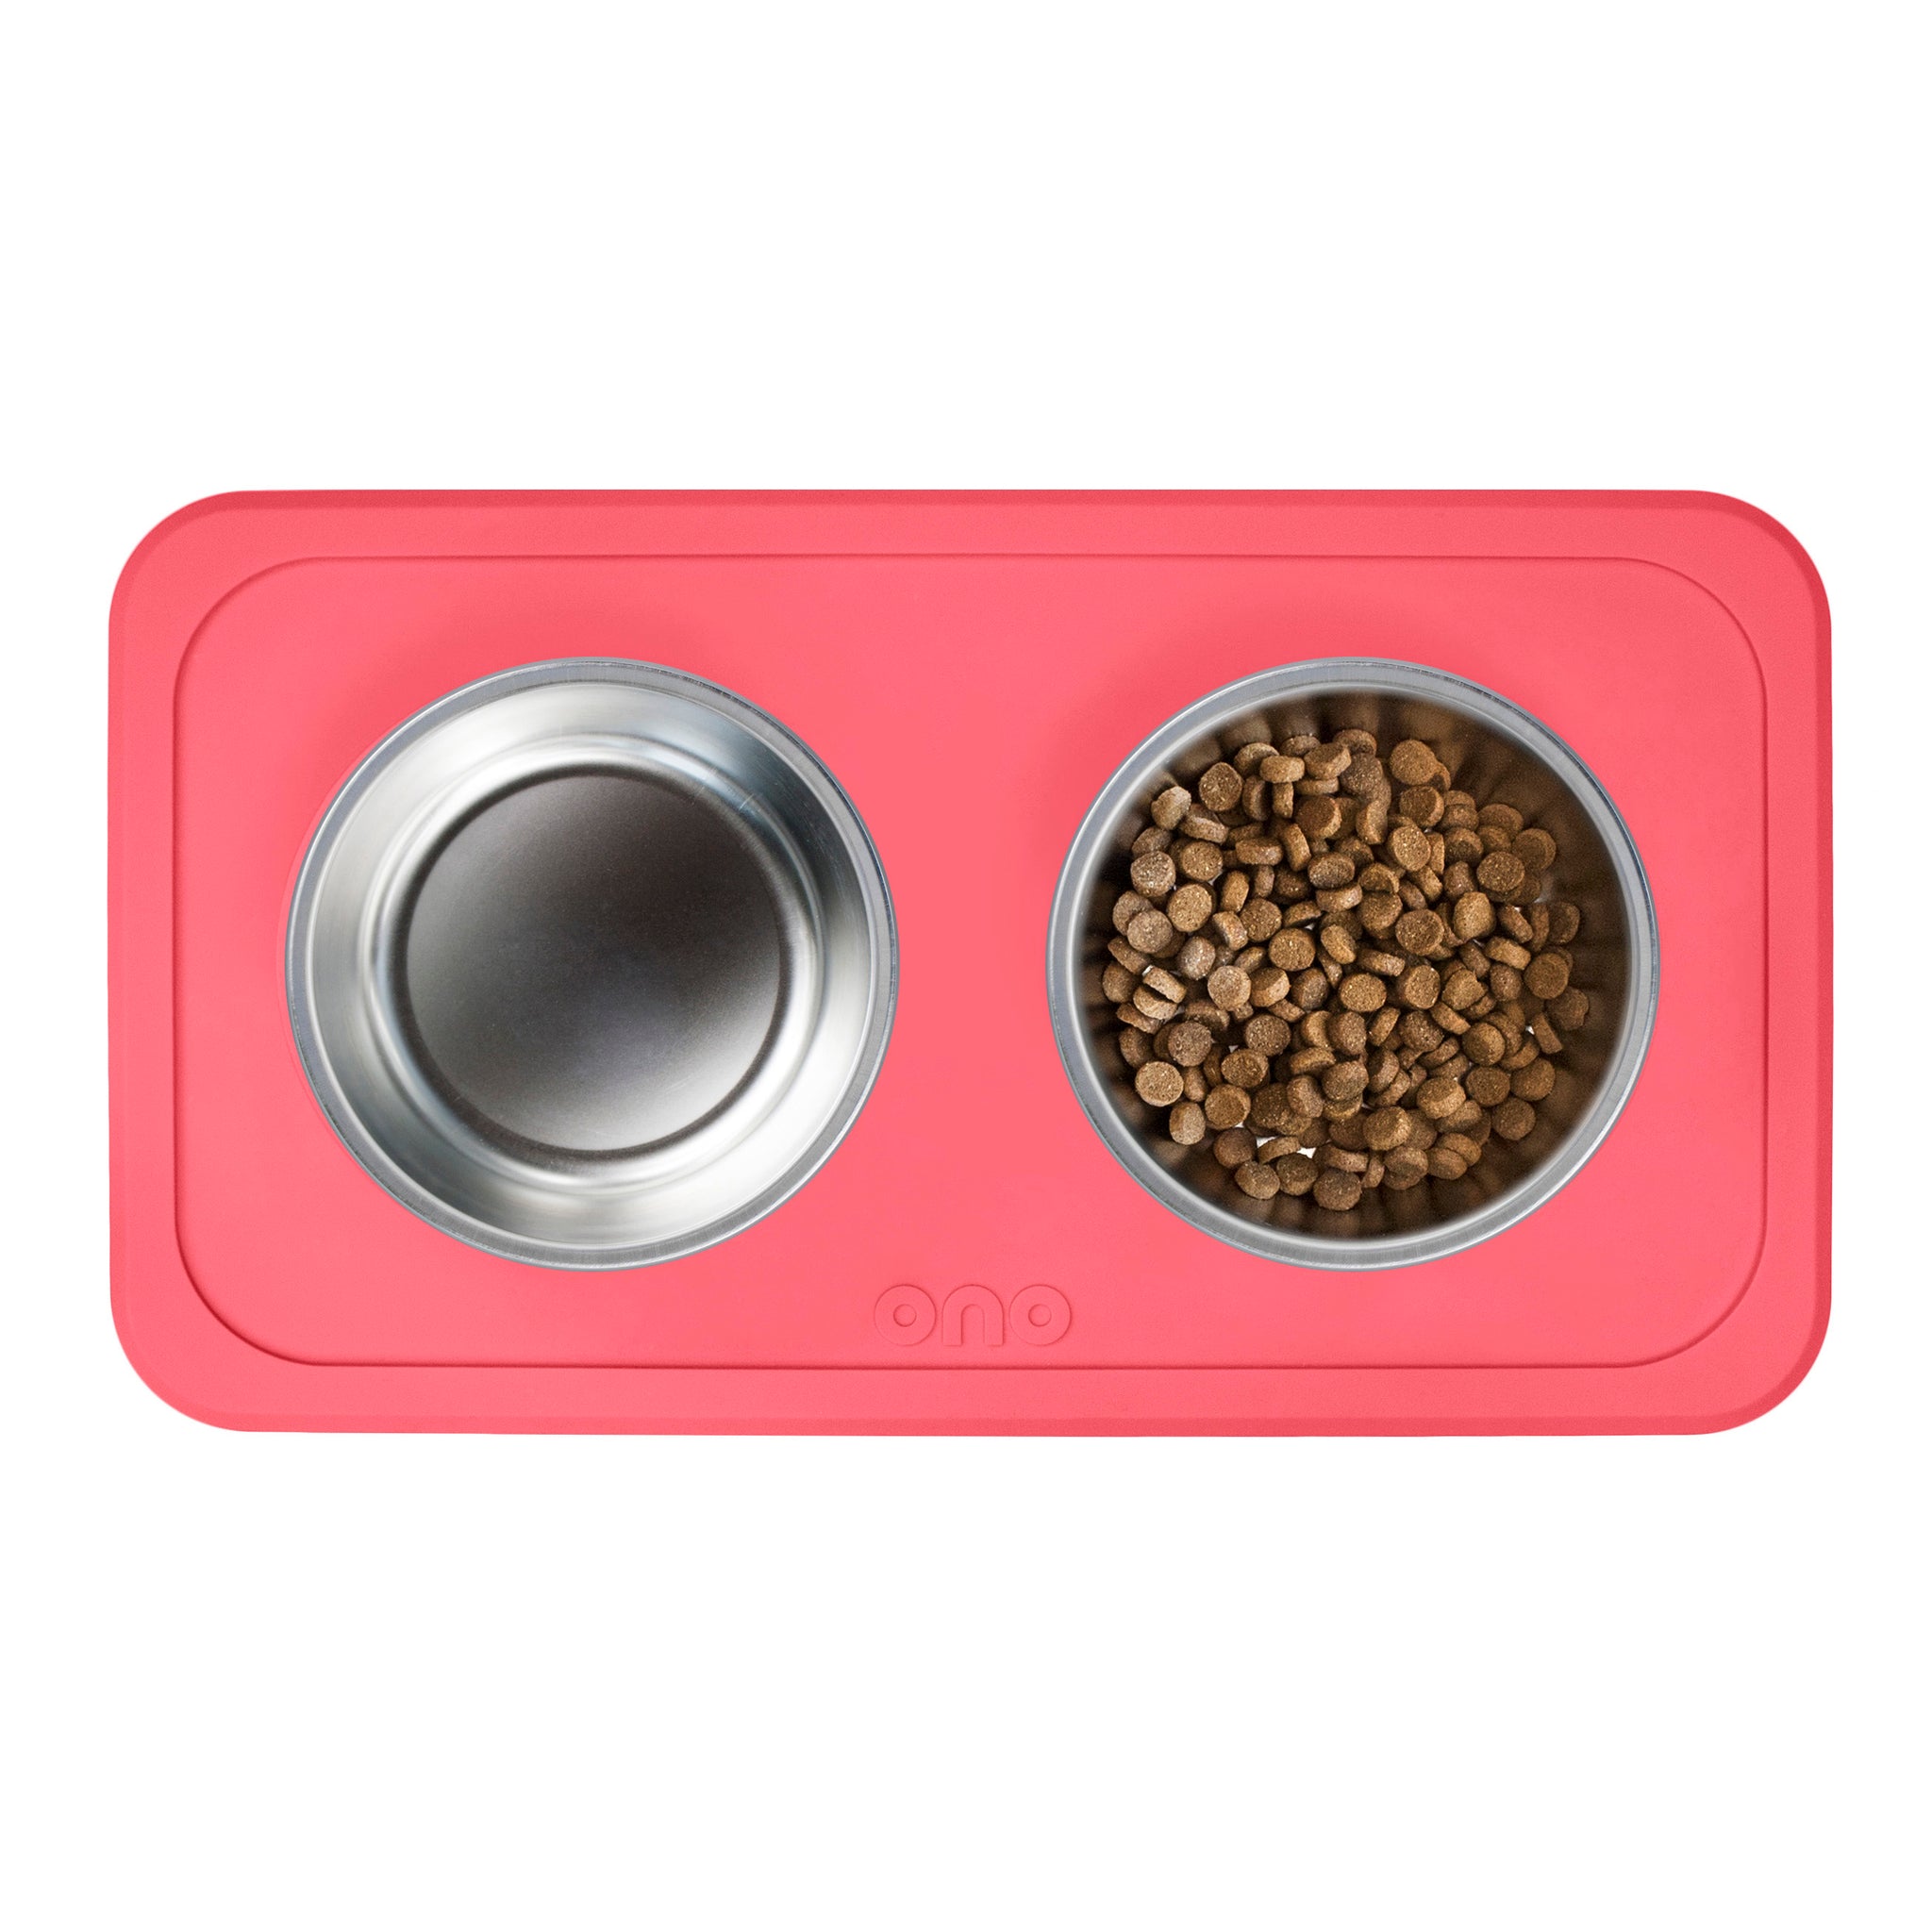 Ono Pet Bowls / Non-Skid, All-in-One Silicone Pet Bowls & Placemats